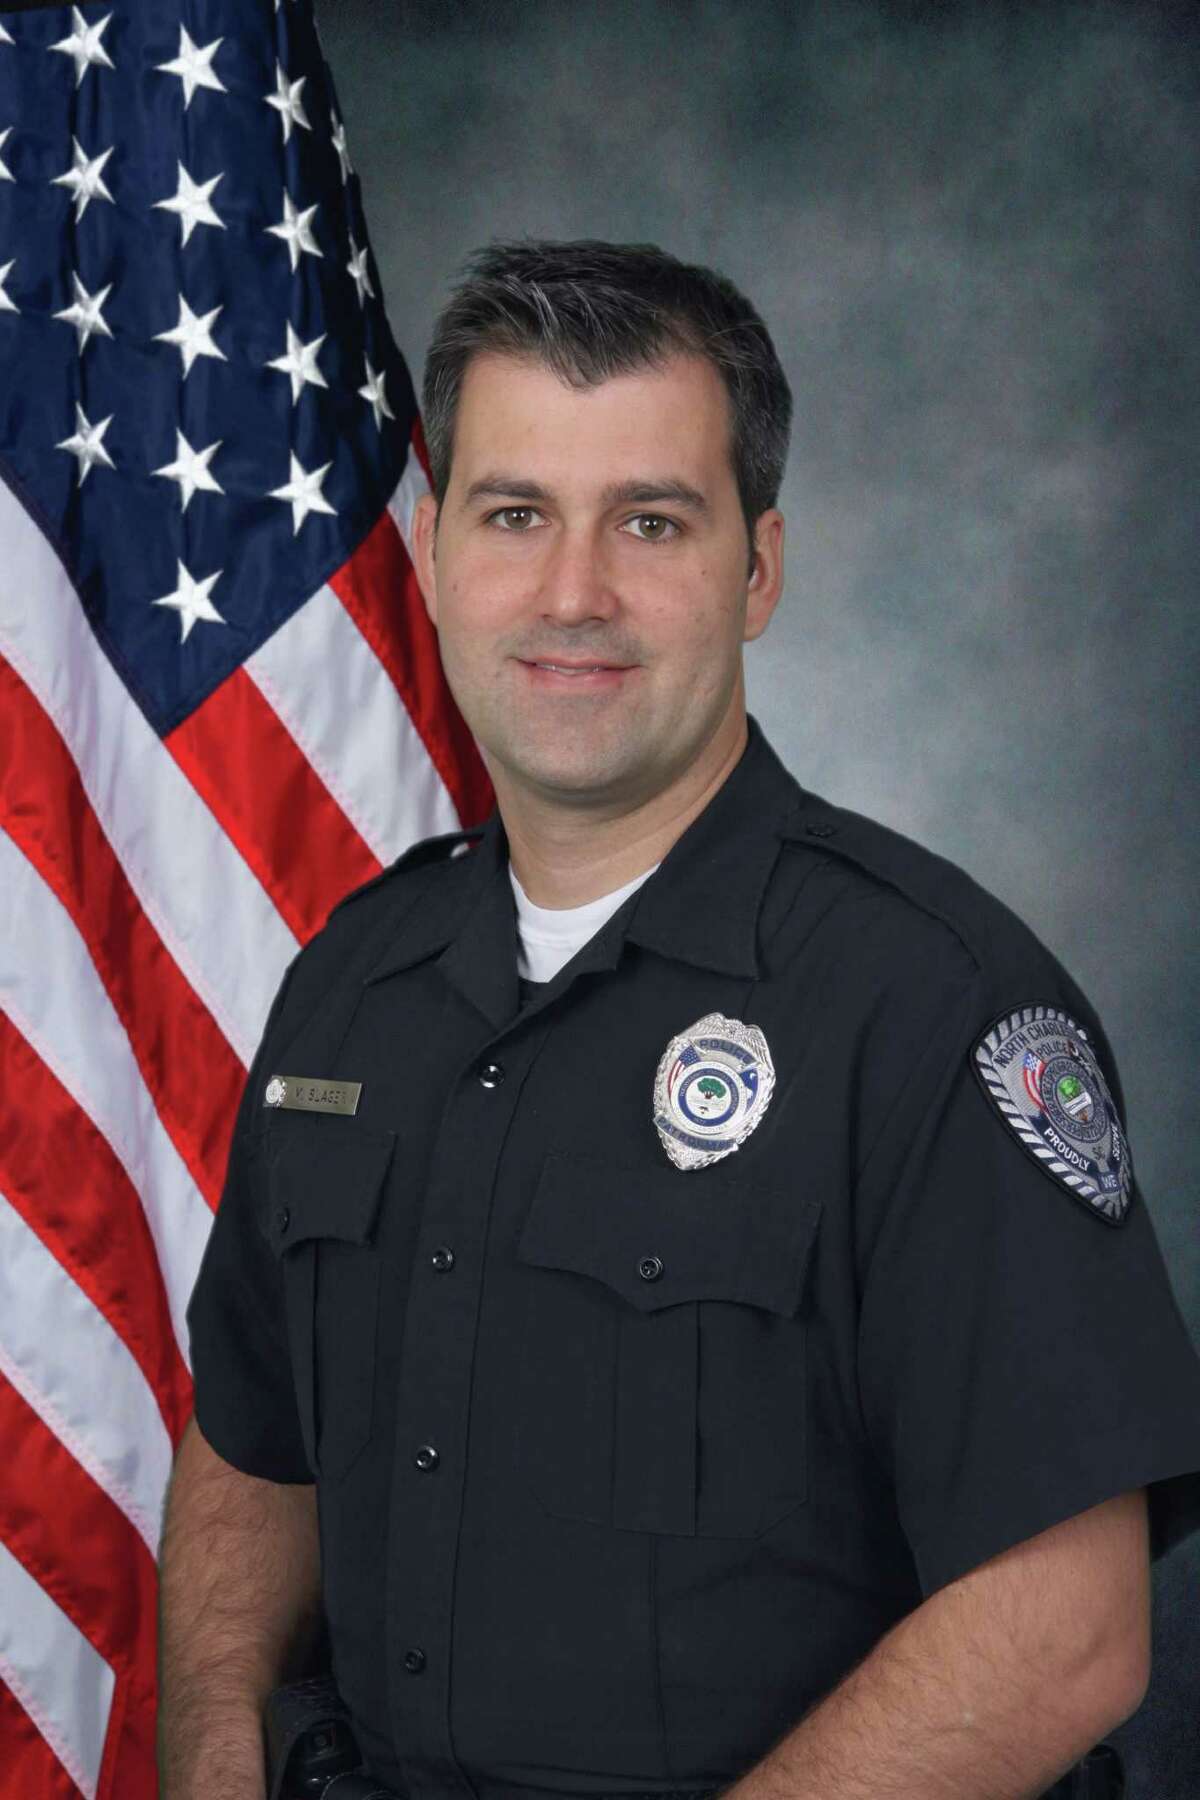 In this undated photo provided by the North Charleston Police Department shows City Patrolman Michael Thomas Slager. Slager has been charged with murder in the shooting death of a black motorist after a traffic stop. North Charleston Mayor Keith Summey told a news conference that city Slager was arrested and charged Tuesday, April 7, 2015, after law enforcement officials saw a video of the shooting following a Saturday traffic stop. (AP Photo/North Charleston Police Department)